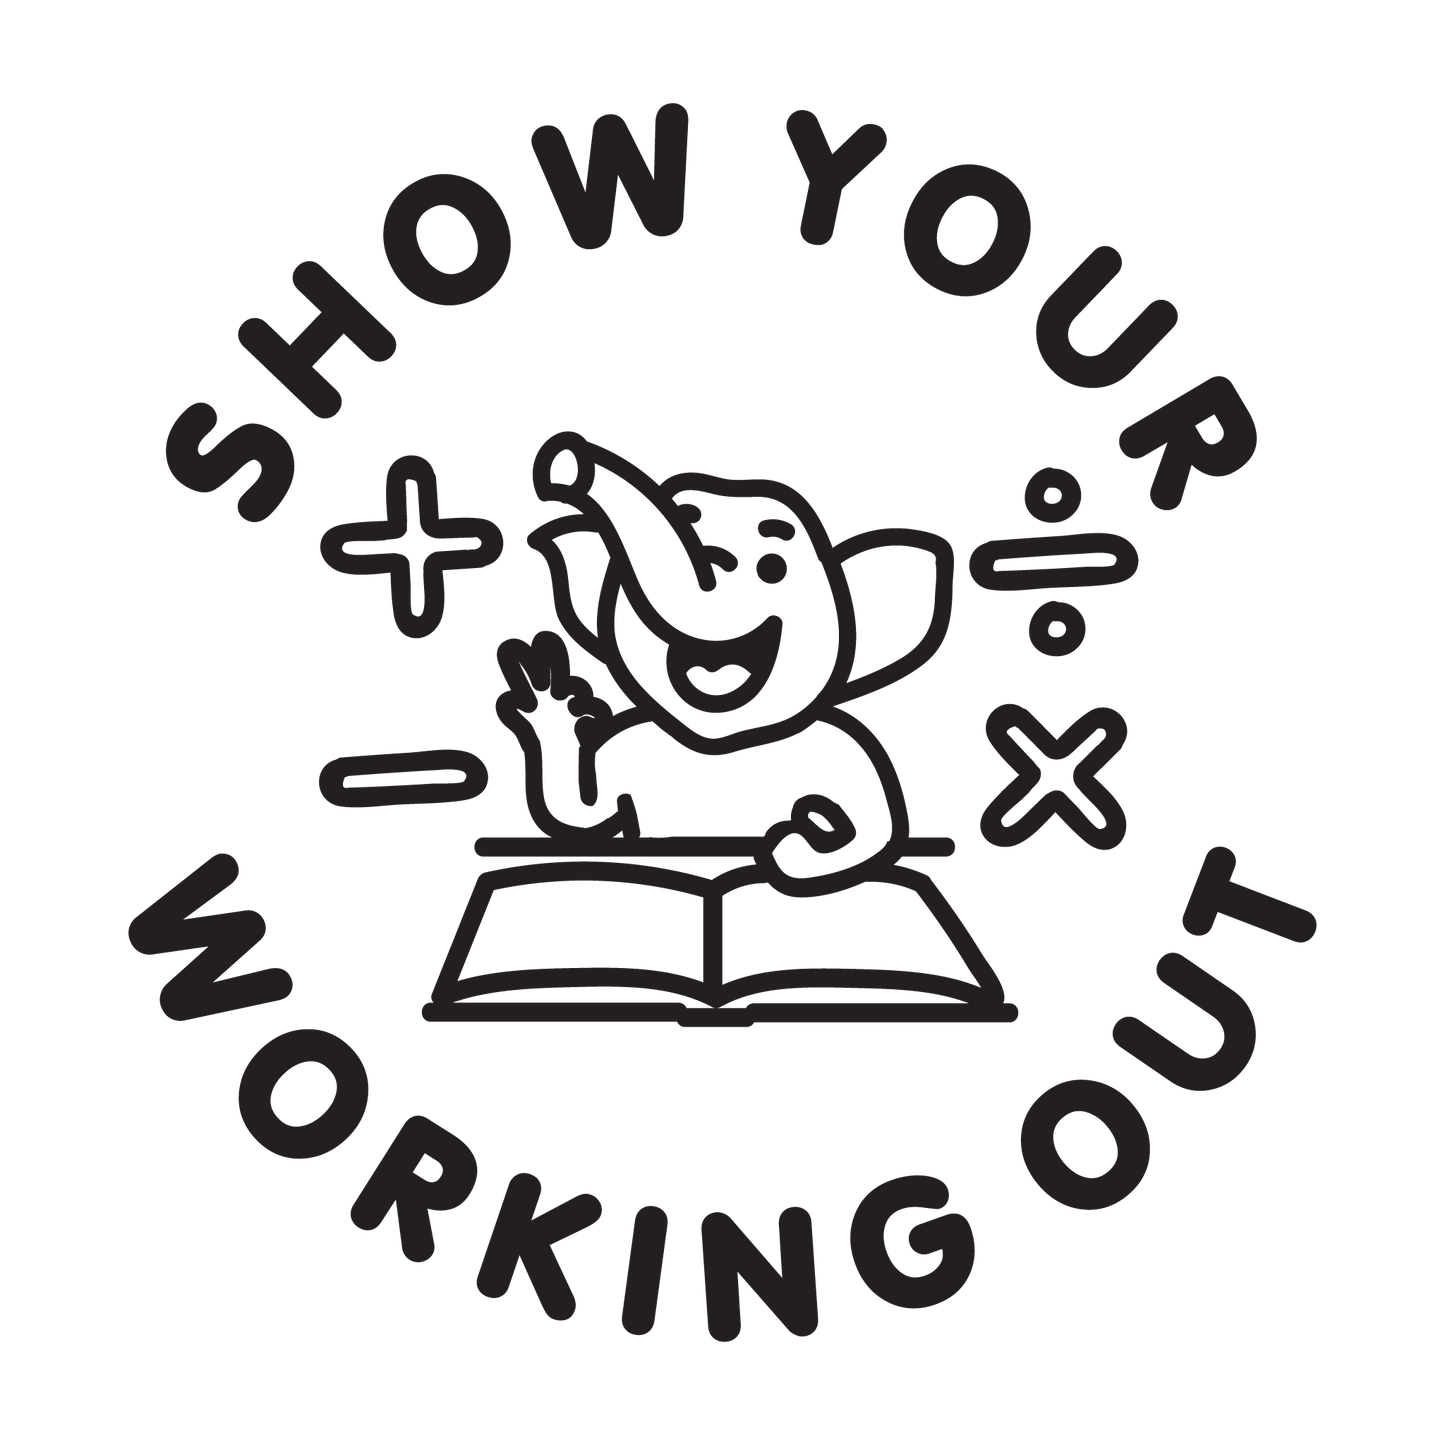 SHOW YOUR WORKING OUT STAMP